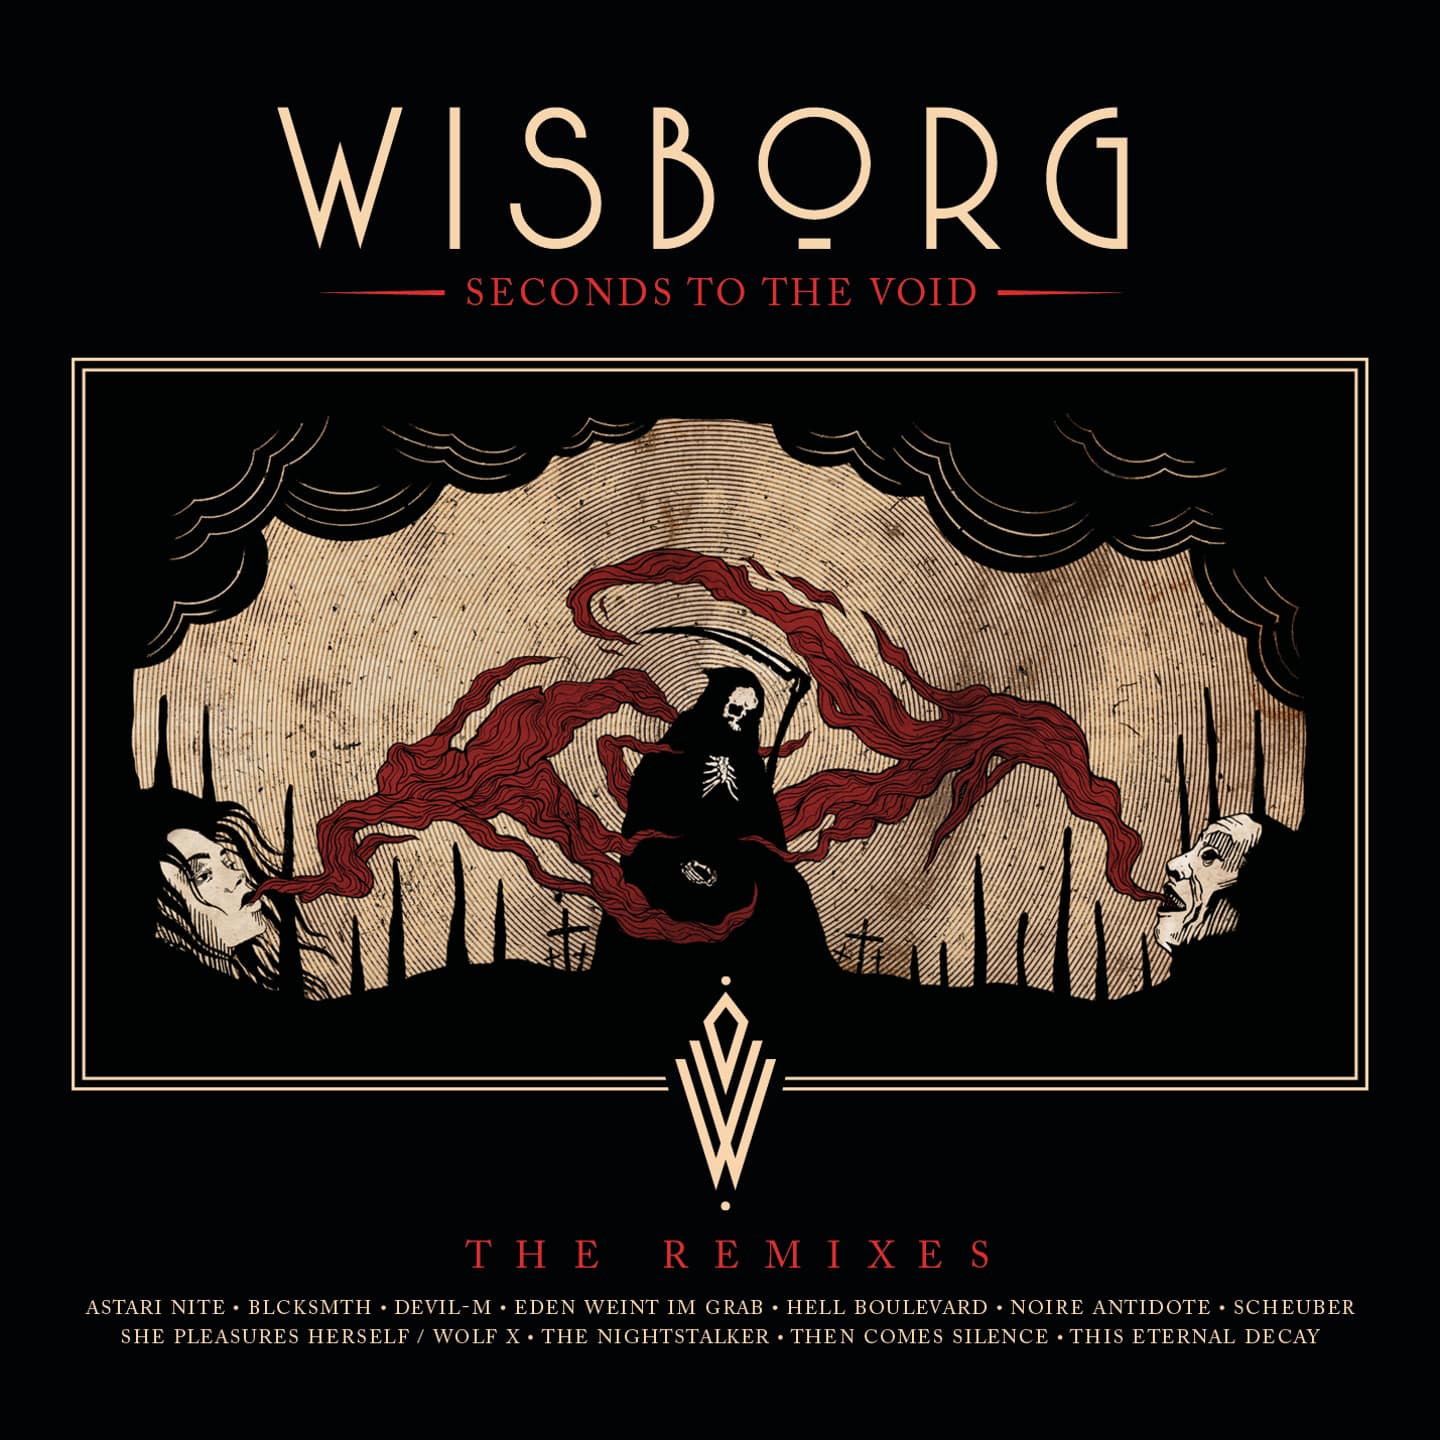 Wisborg_Seconds_To_The_Void_The_Remixes_album_cover.jpg